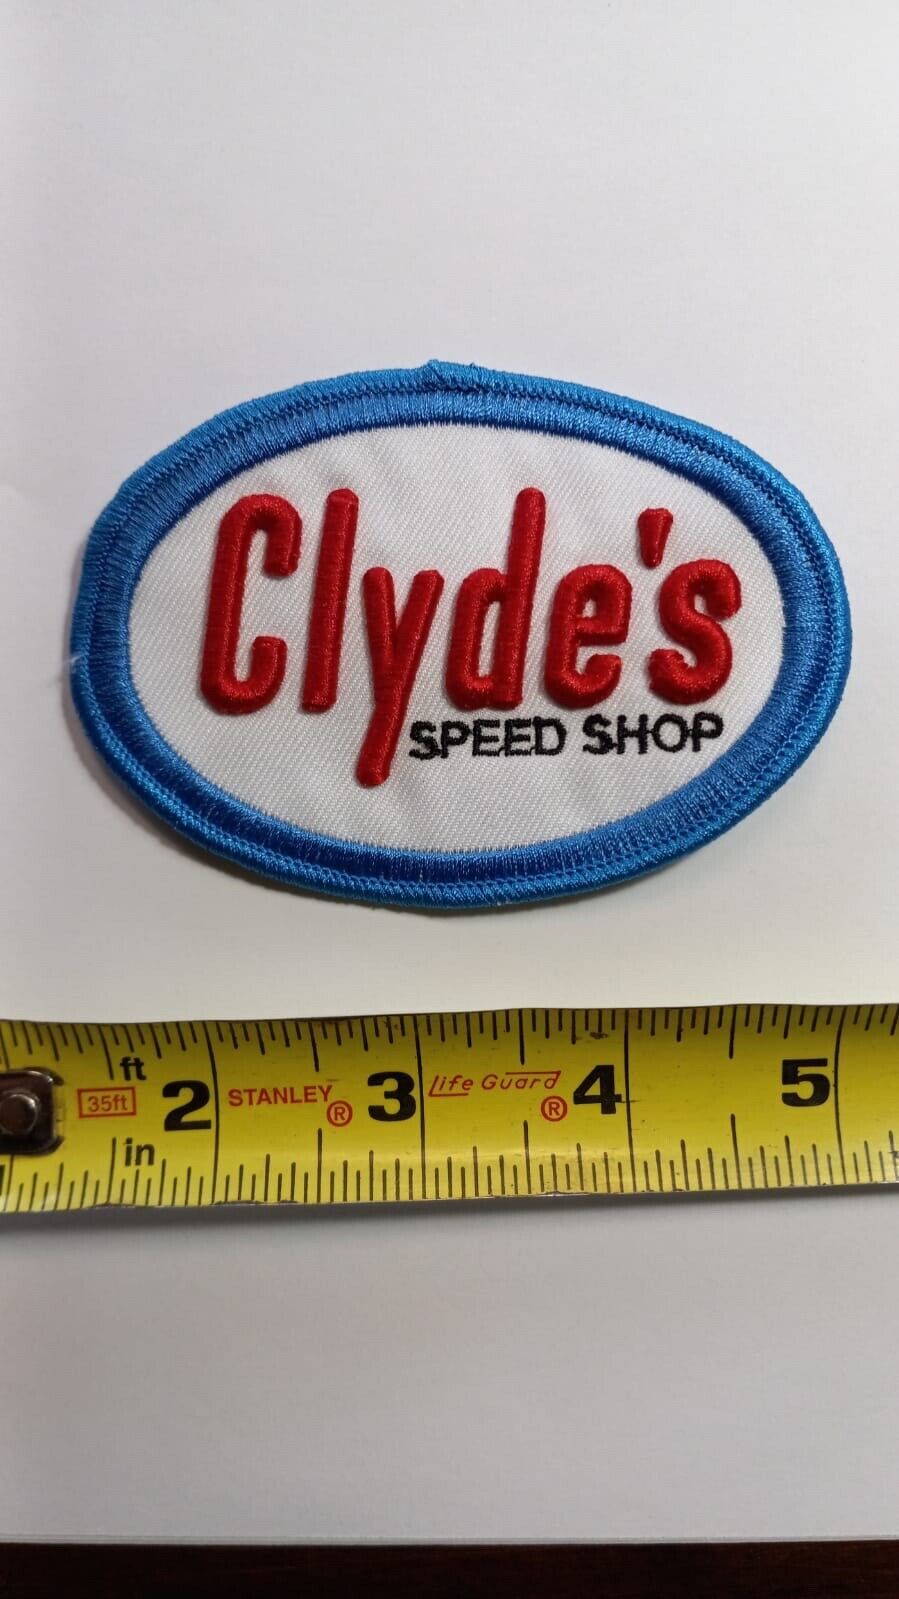 New Sew-on Clyde\'s Speed Shop Racing Patch